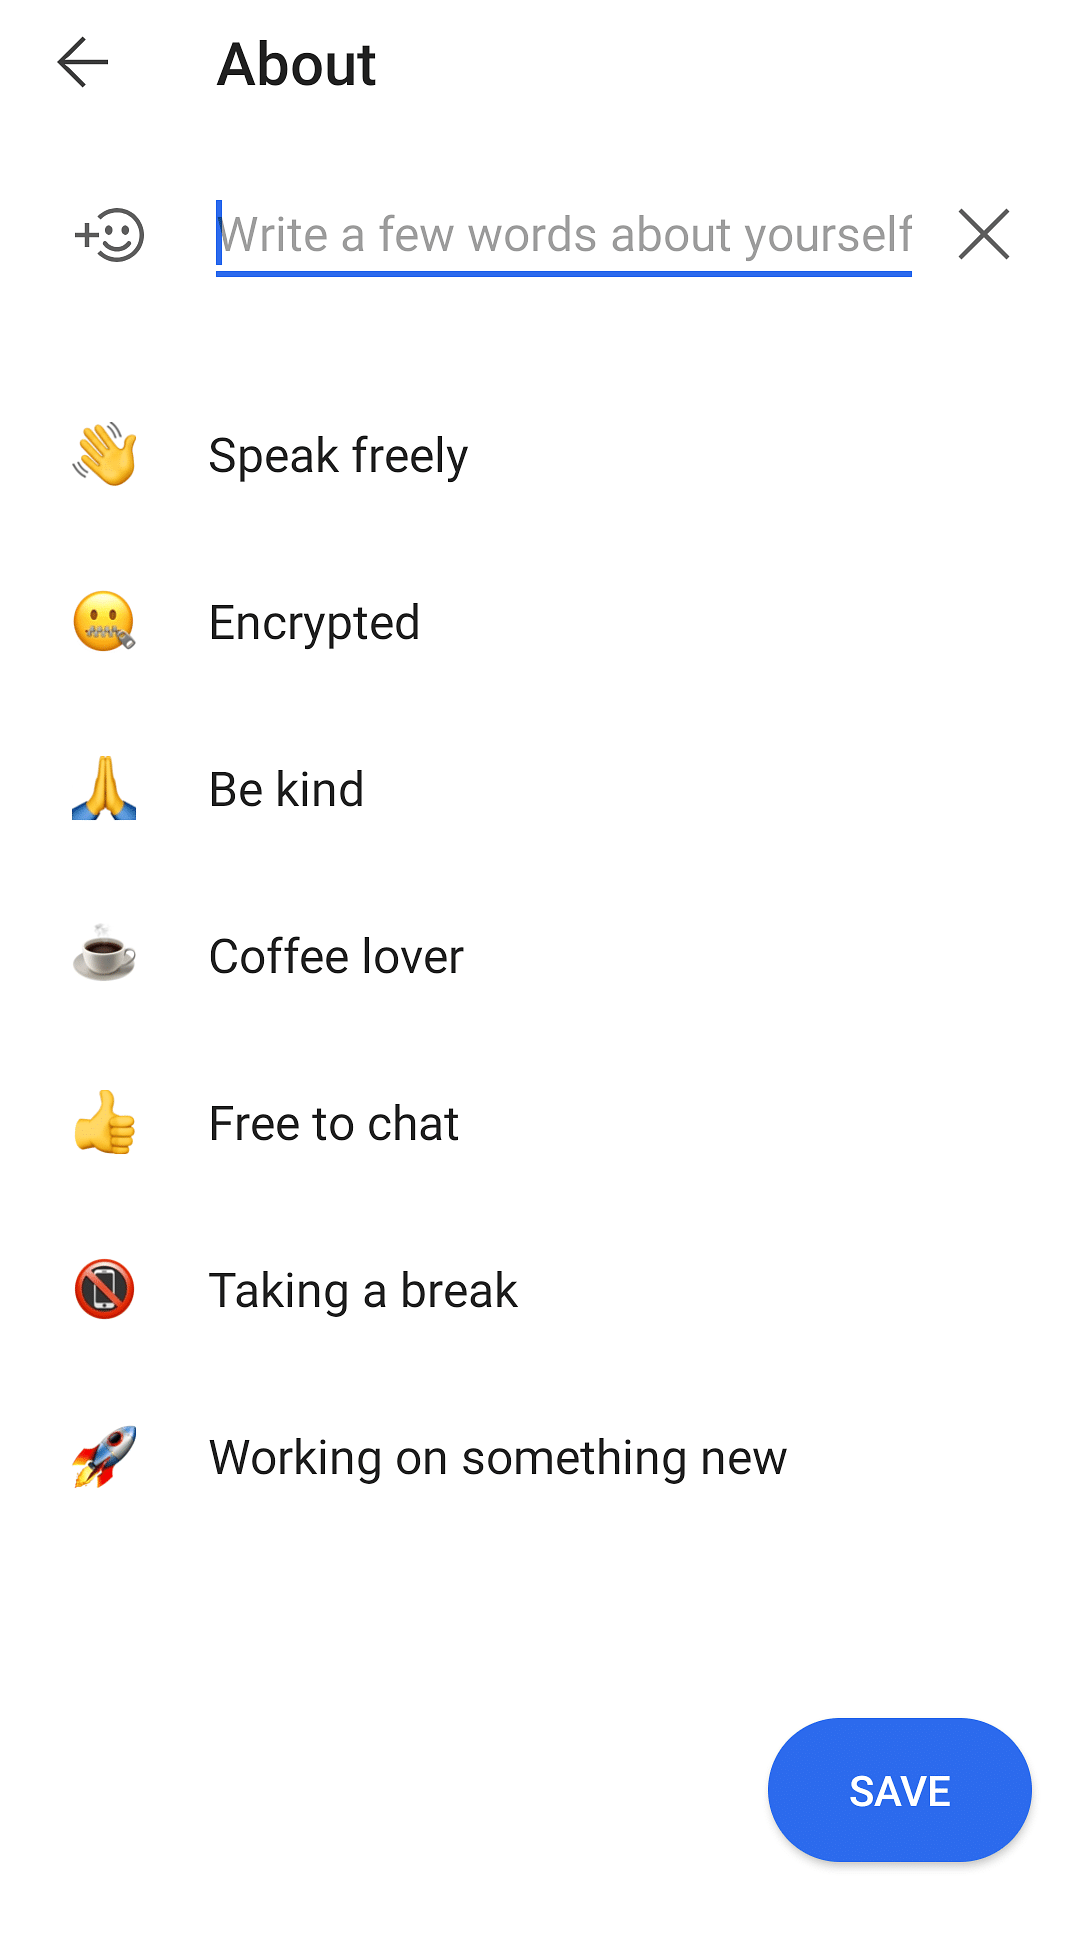 The new Signal features range from changing chat wallpapers, to newly introduced animated stickers.